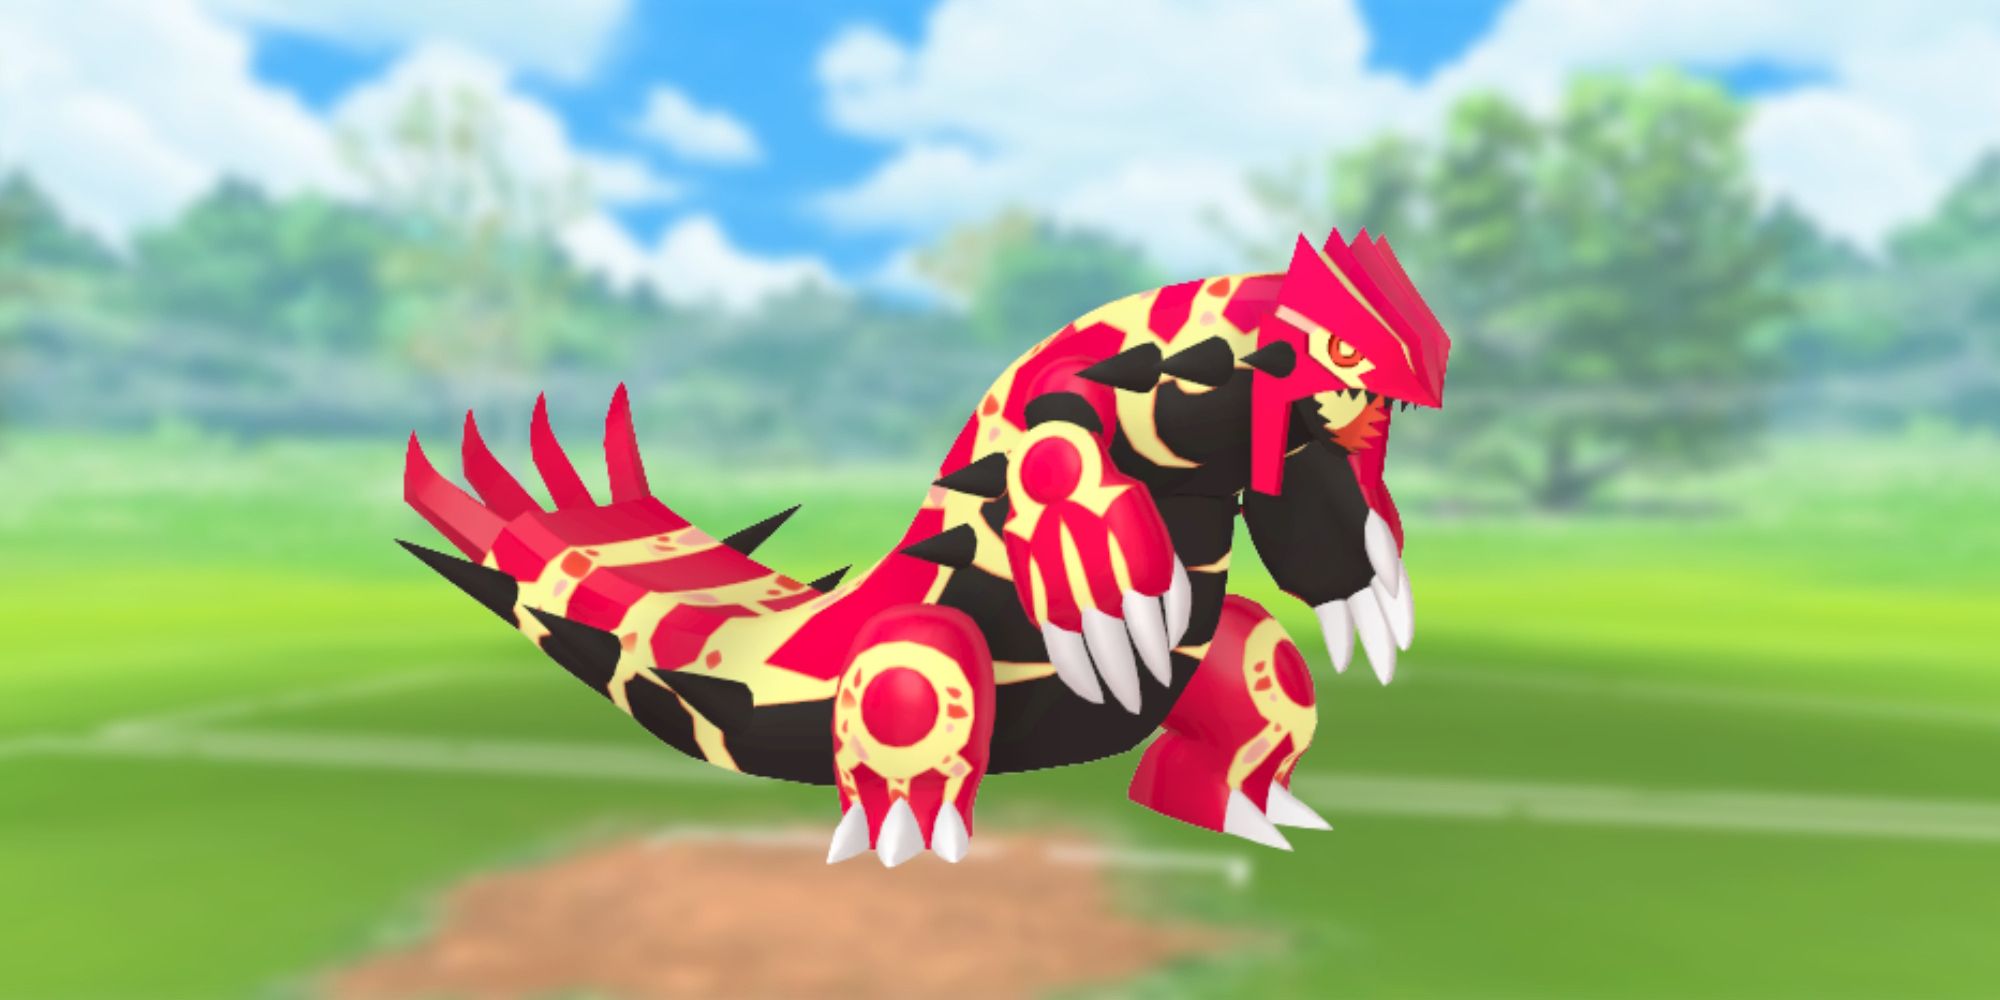 Image of Primal Groudon from Pokemon, with the Pokemon Go battlefield as the background